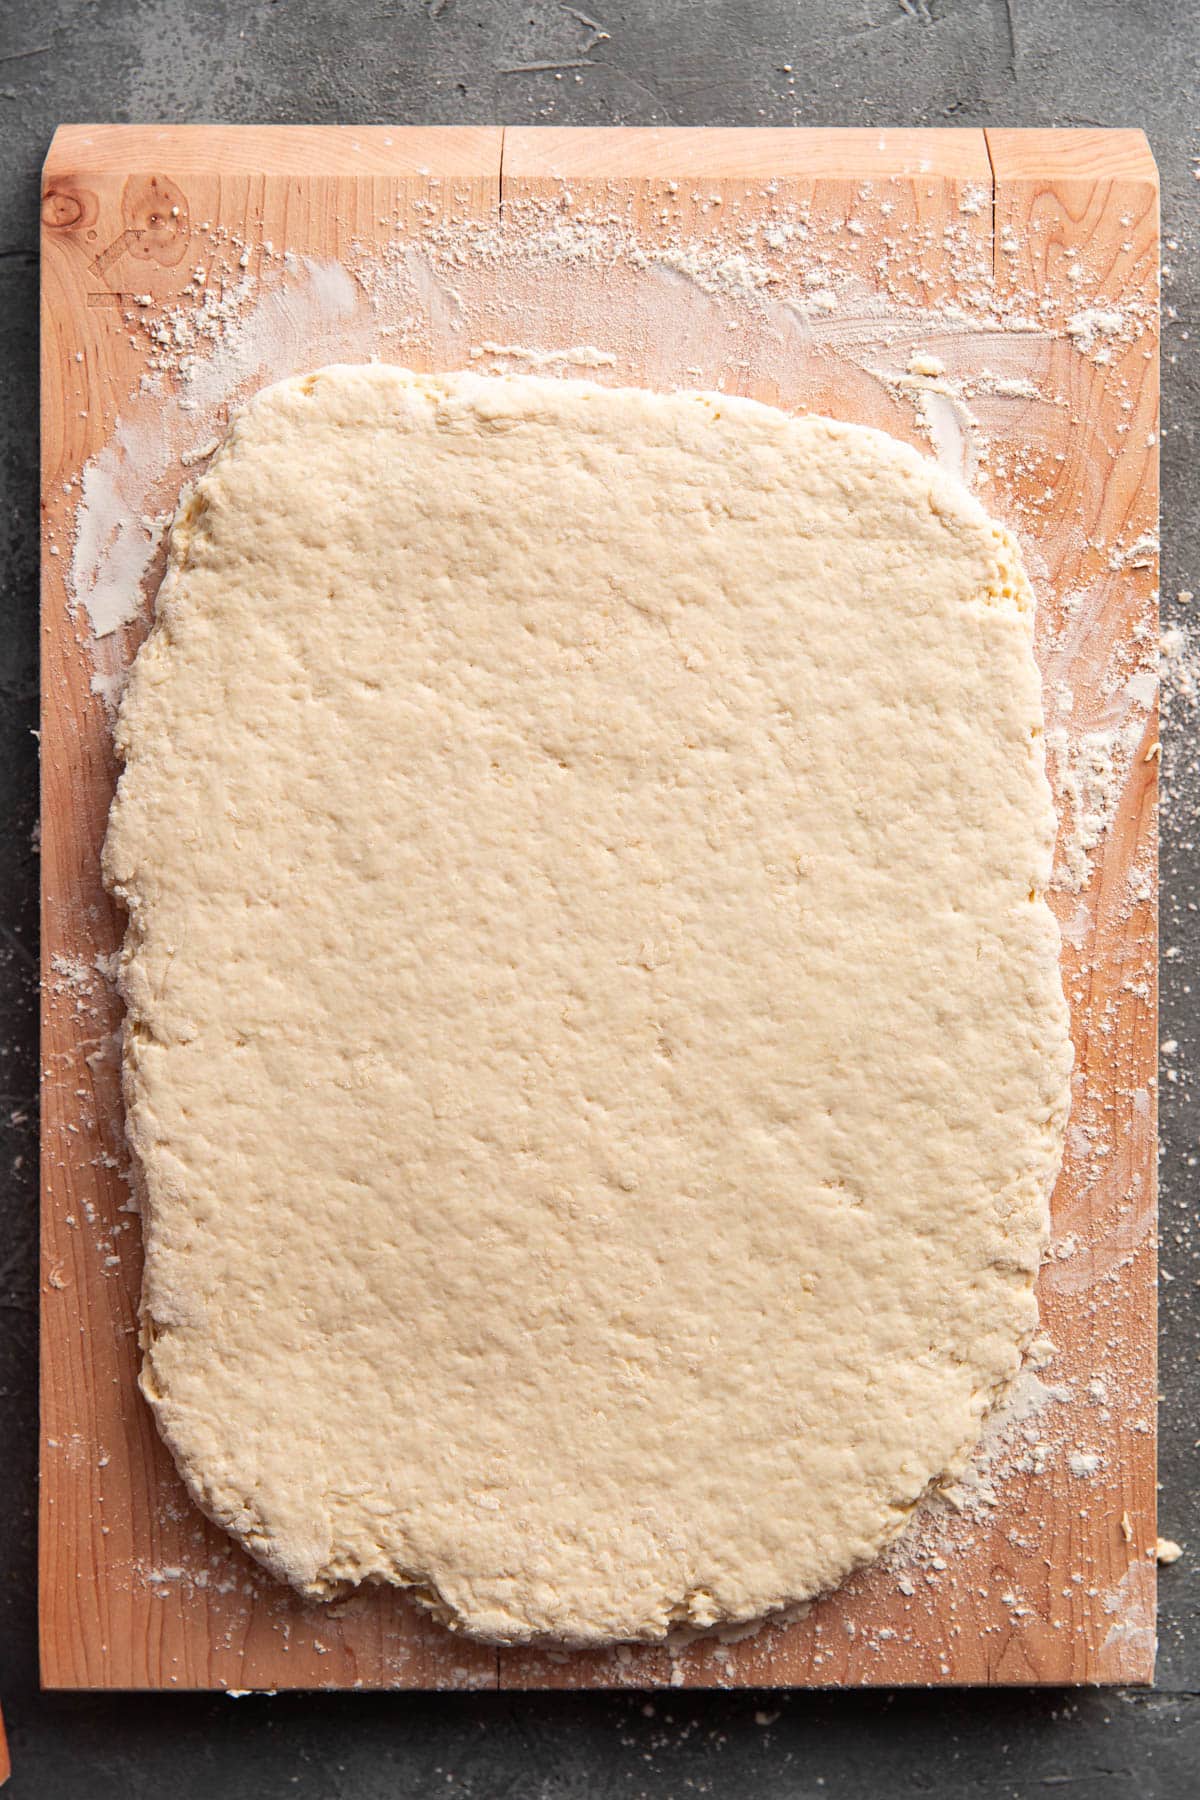 biscuit dough on a cutting board rolled out